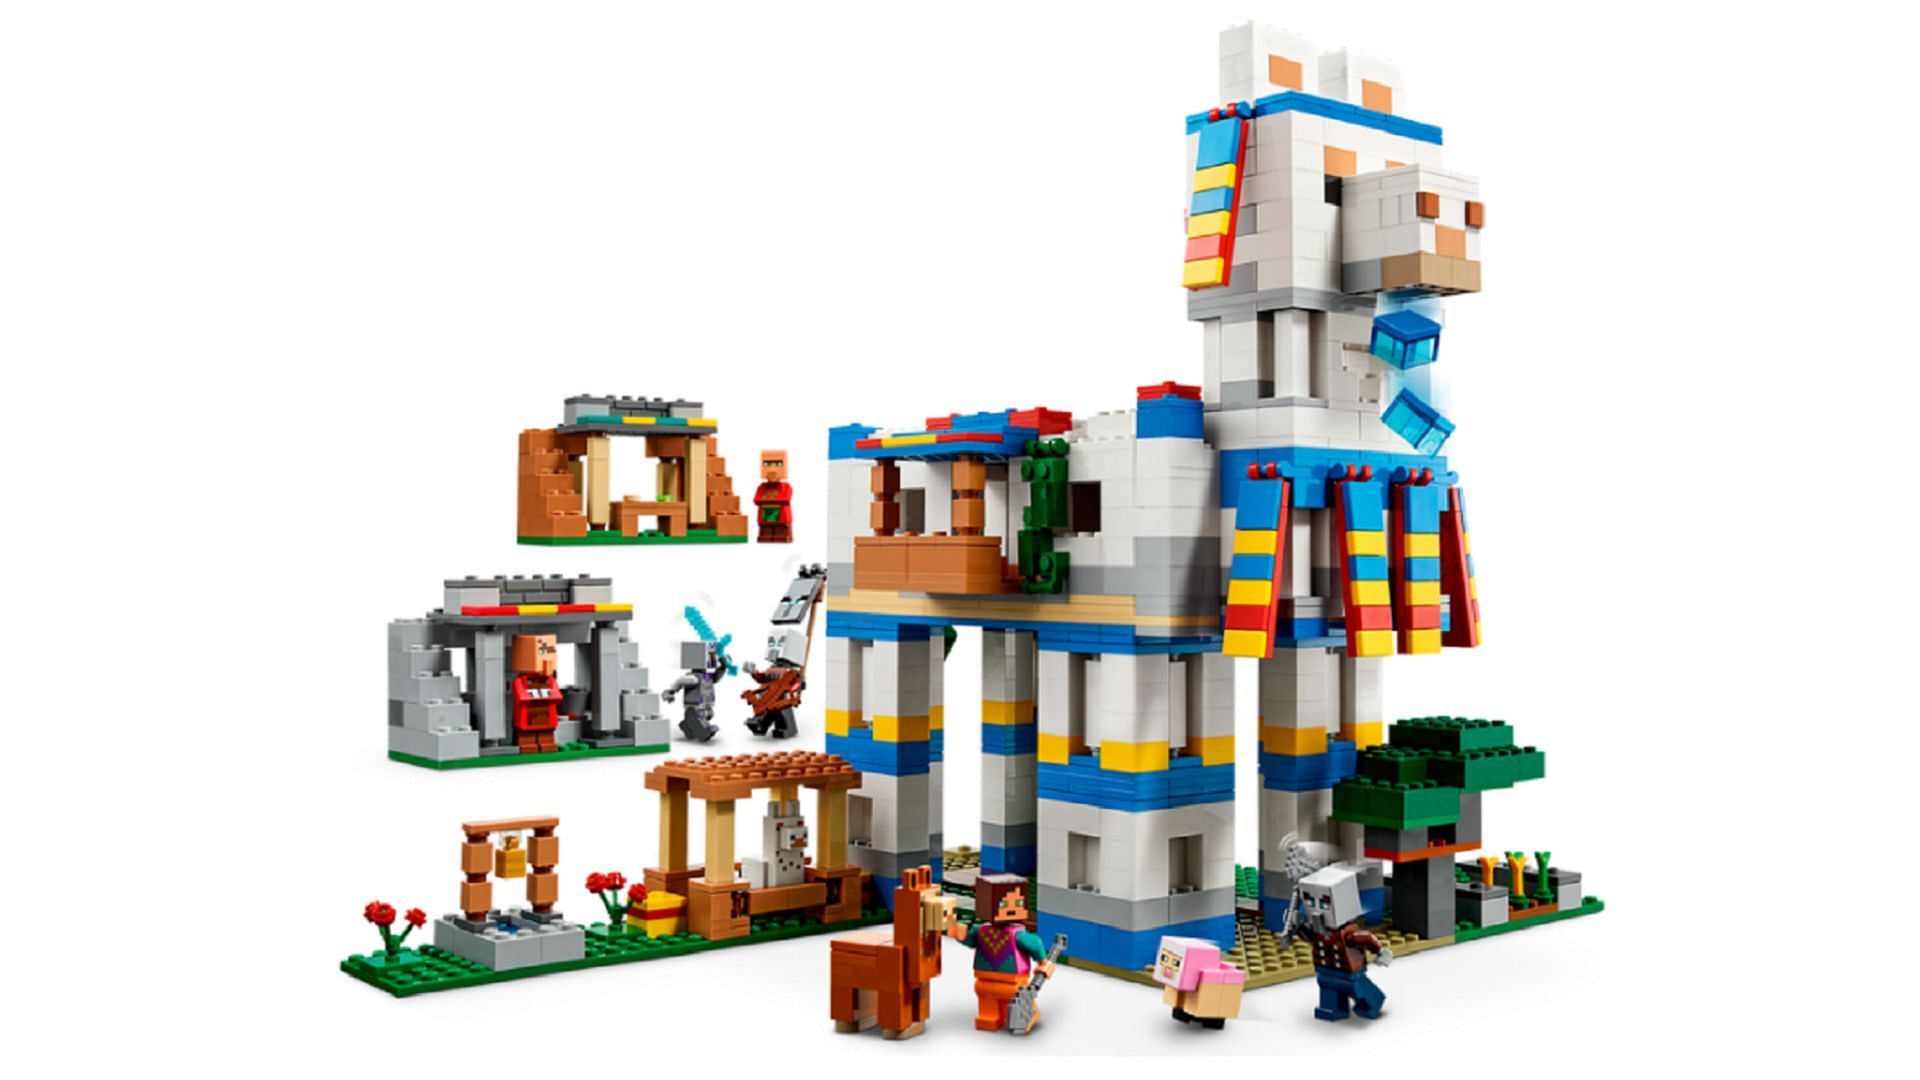 This set may be pricey, but fans will get what they pay for (Image via Mojang/Lego)